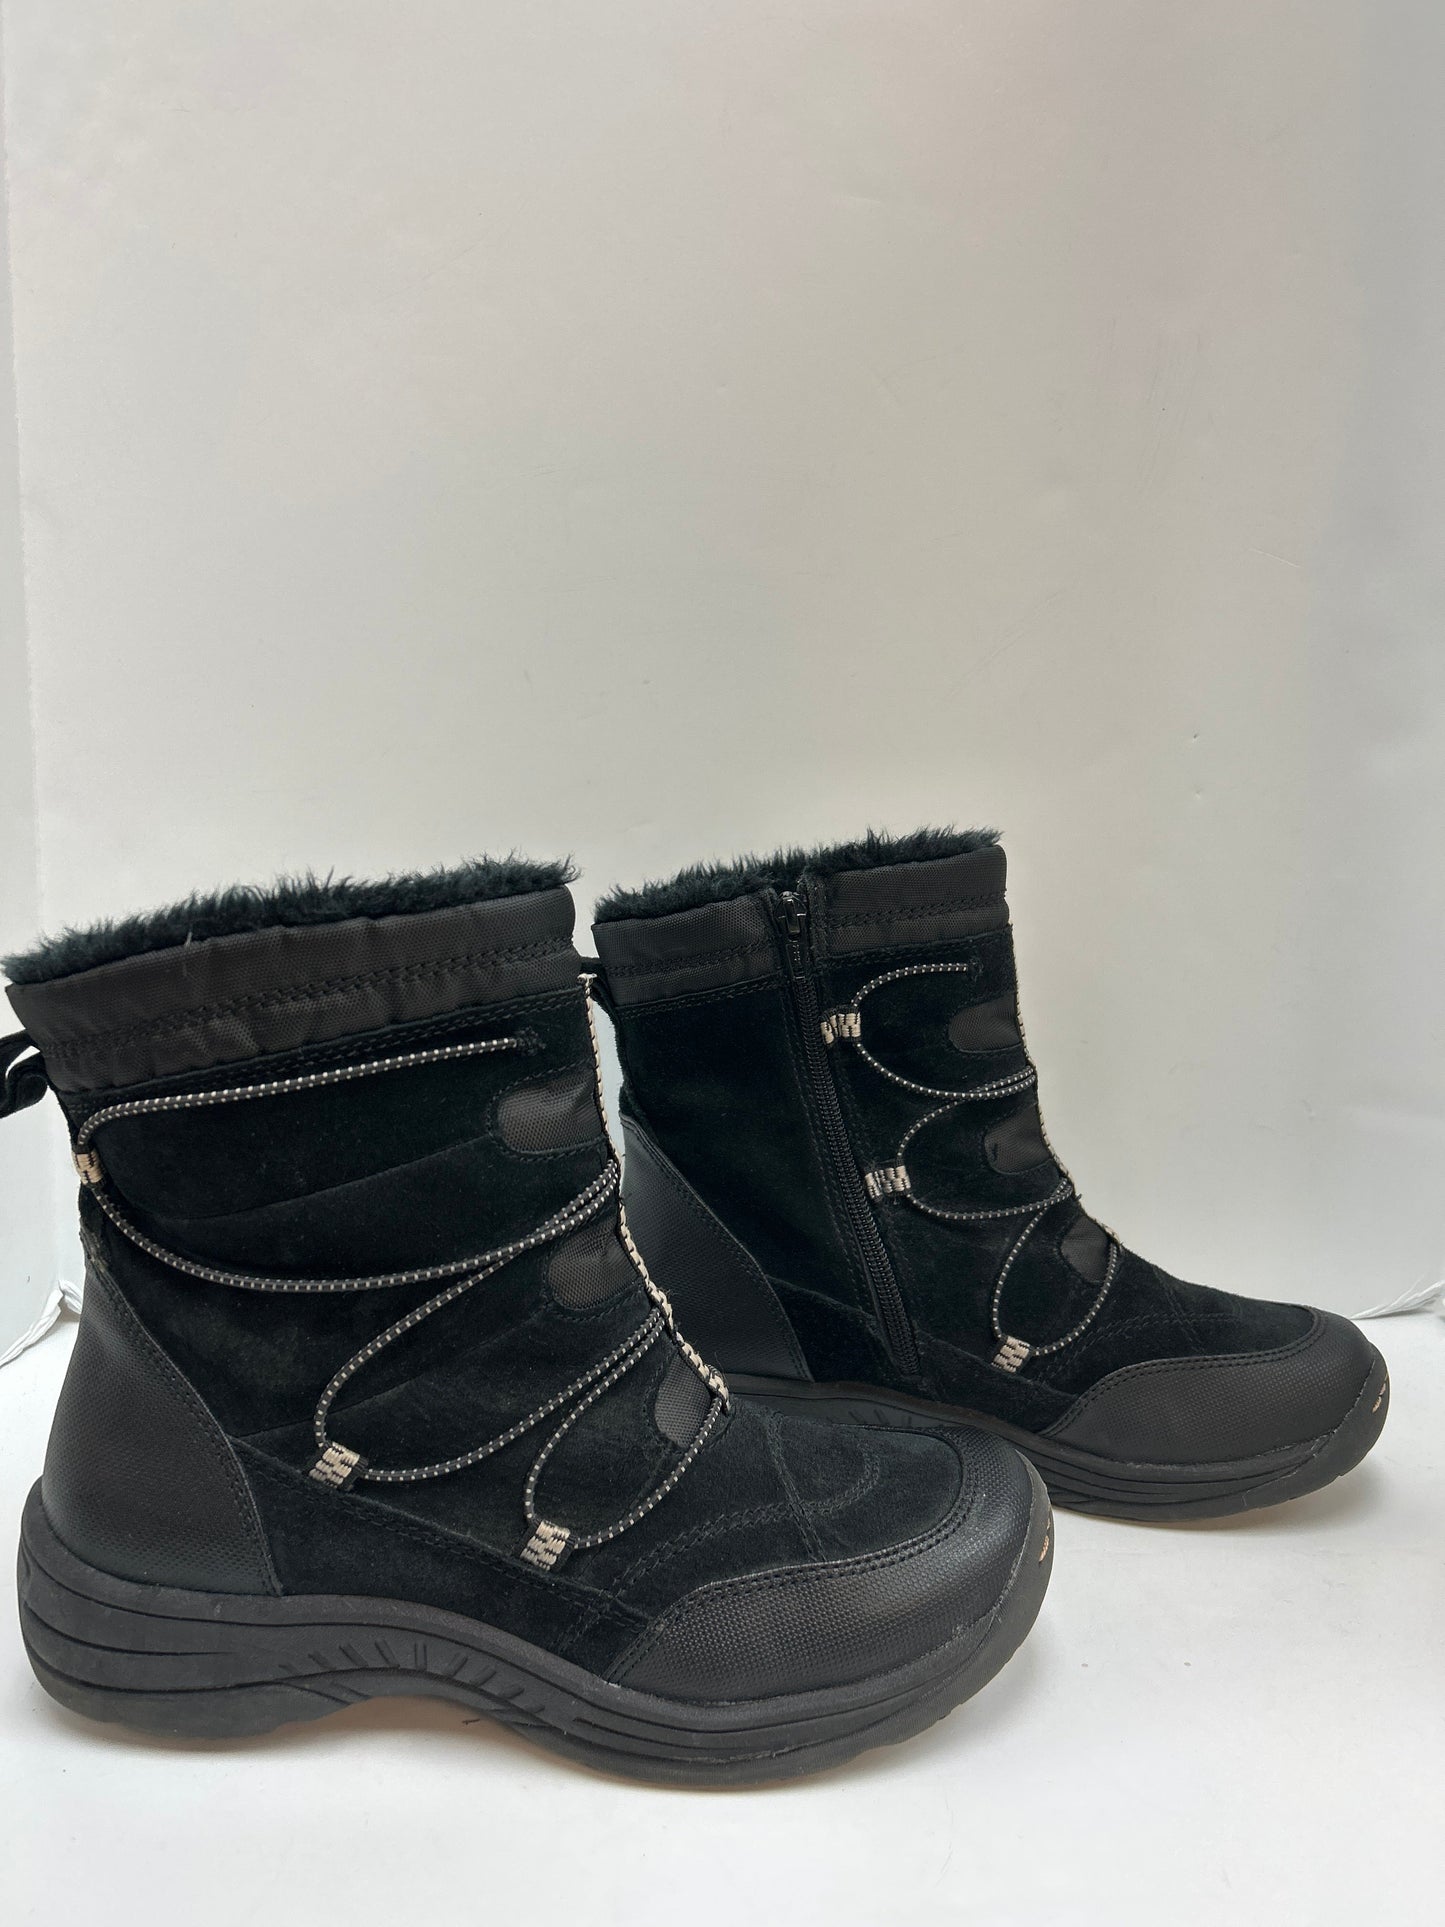 Boots Snow By Bare Traps  Size: 9.5